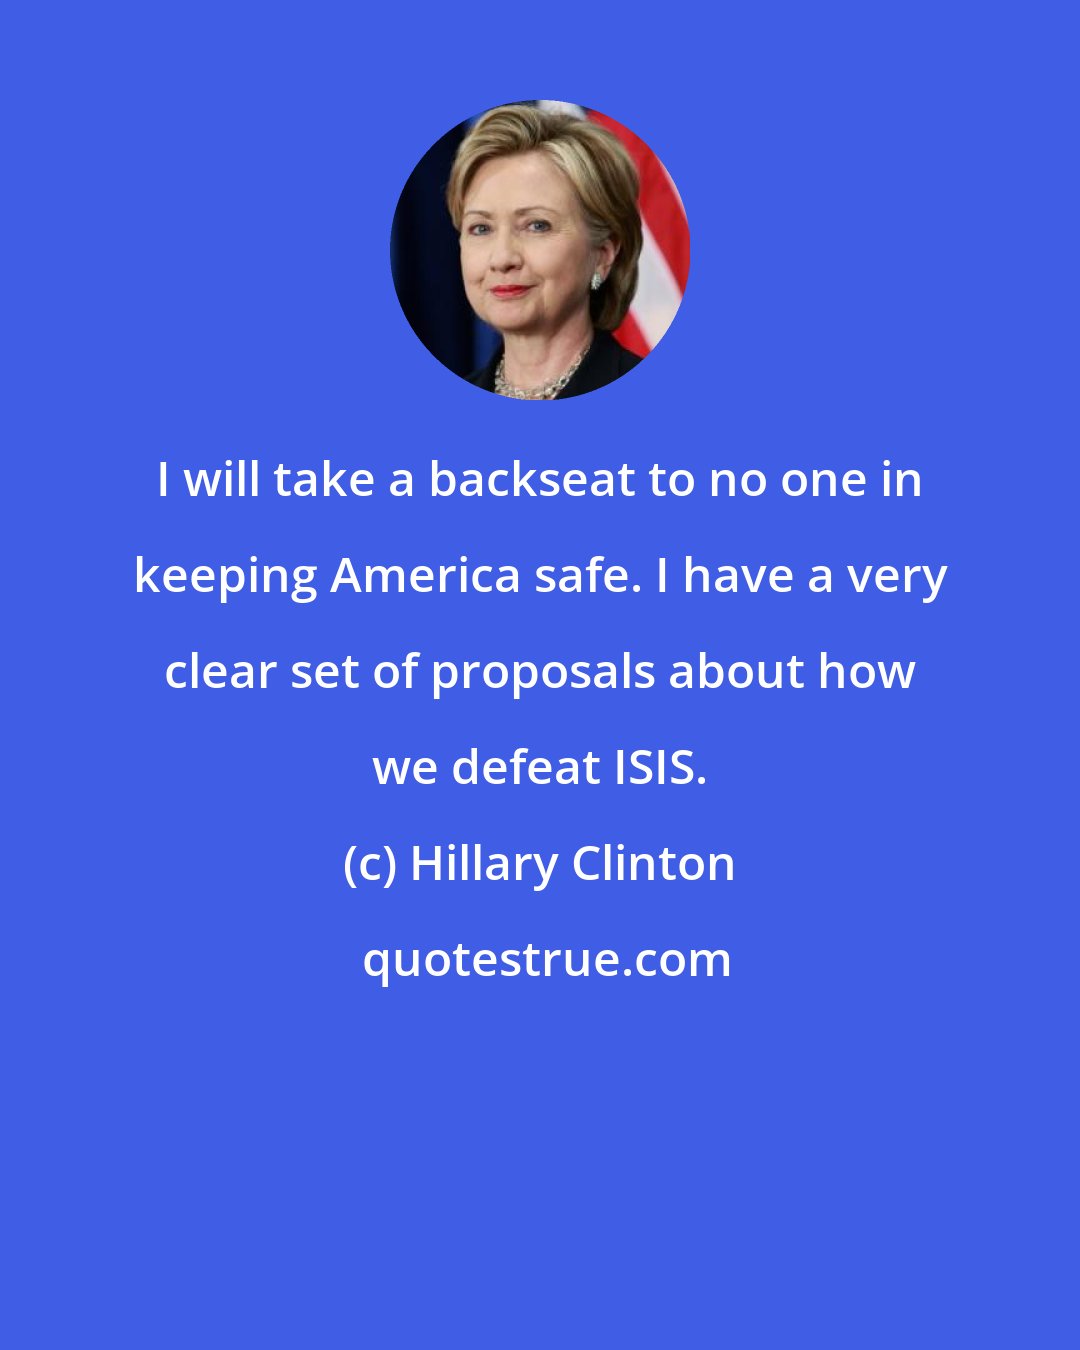 Hillary Clinton: I will take a backseat to no one in keeping America safe. I have a very clear set of proposals about how we defeat ISIS.